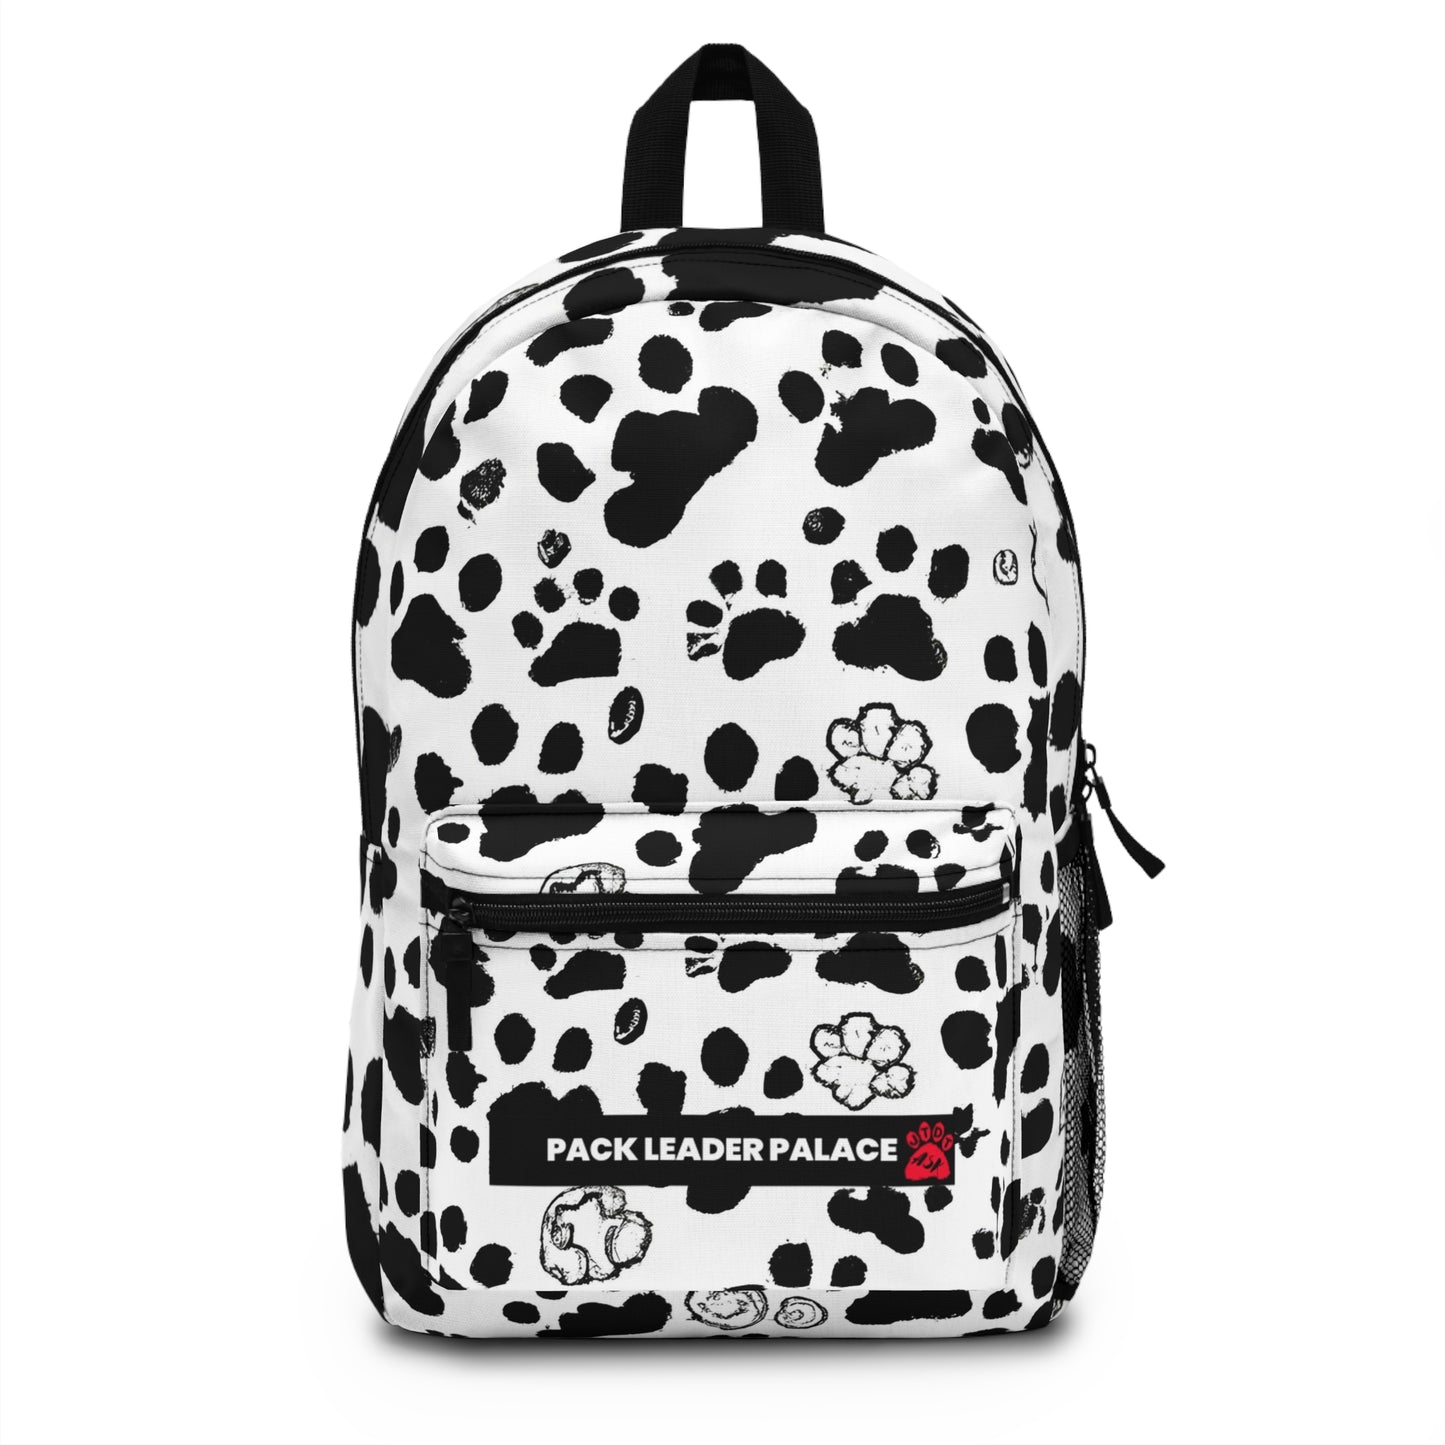 Lizette Oserin - Paw Print - Backpack